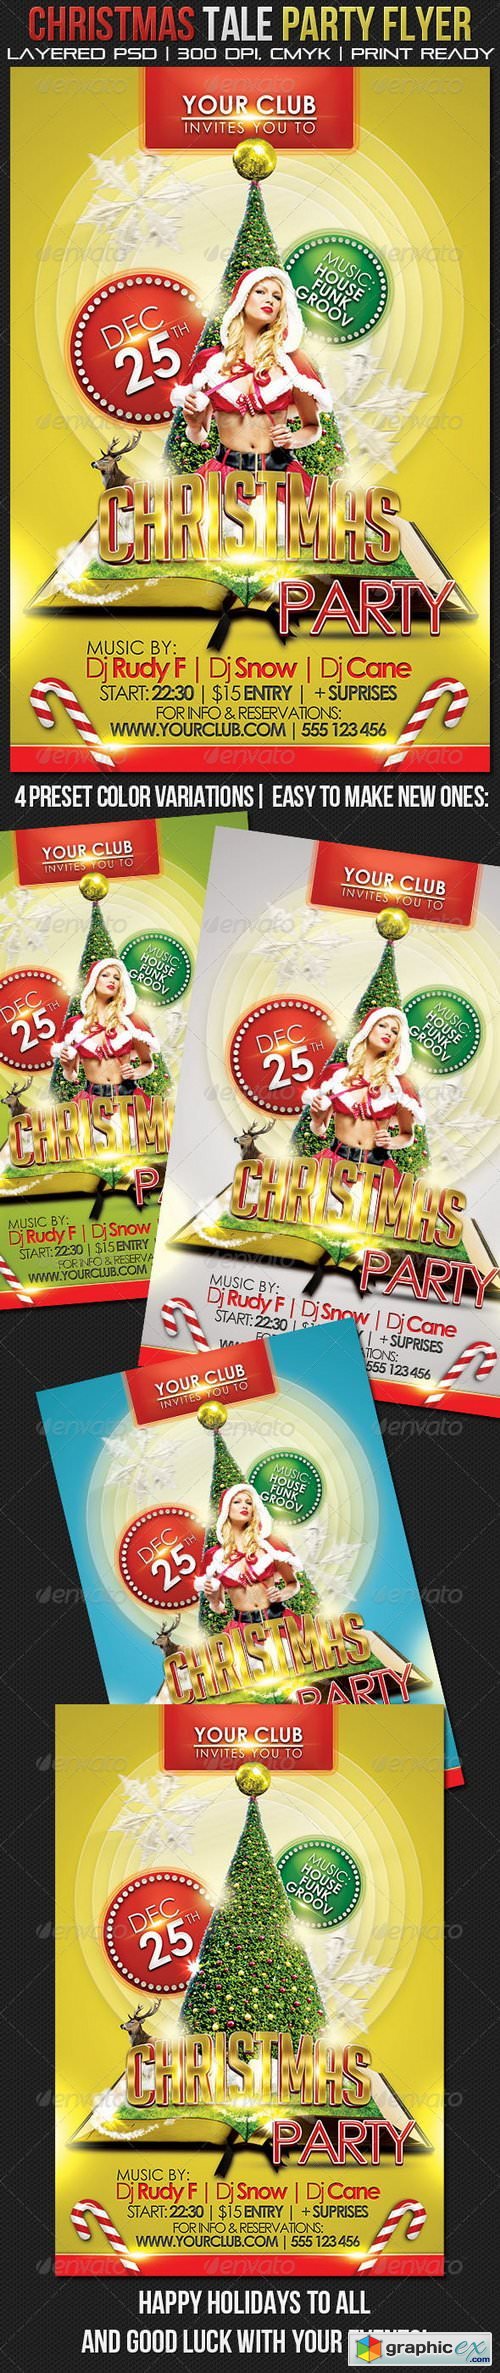 Christmas Tale Party Flyer